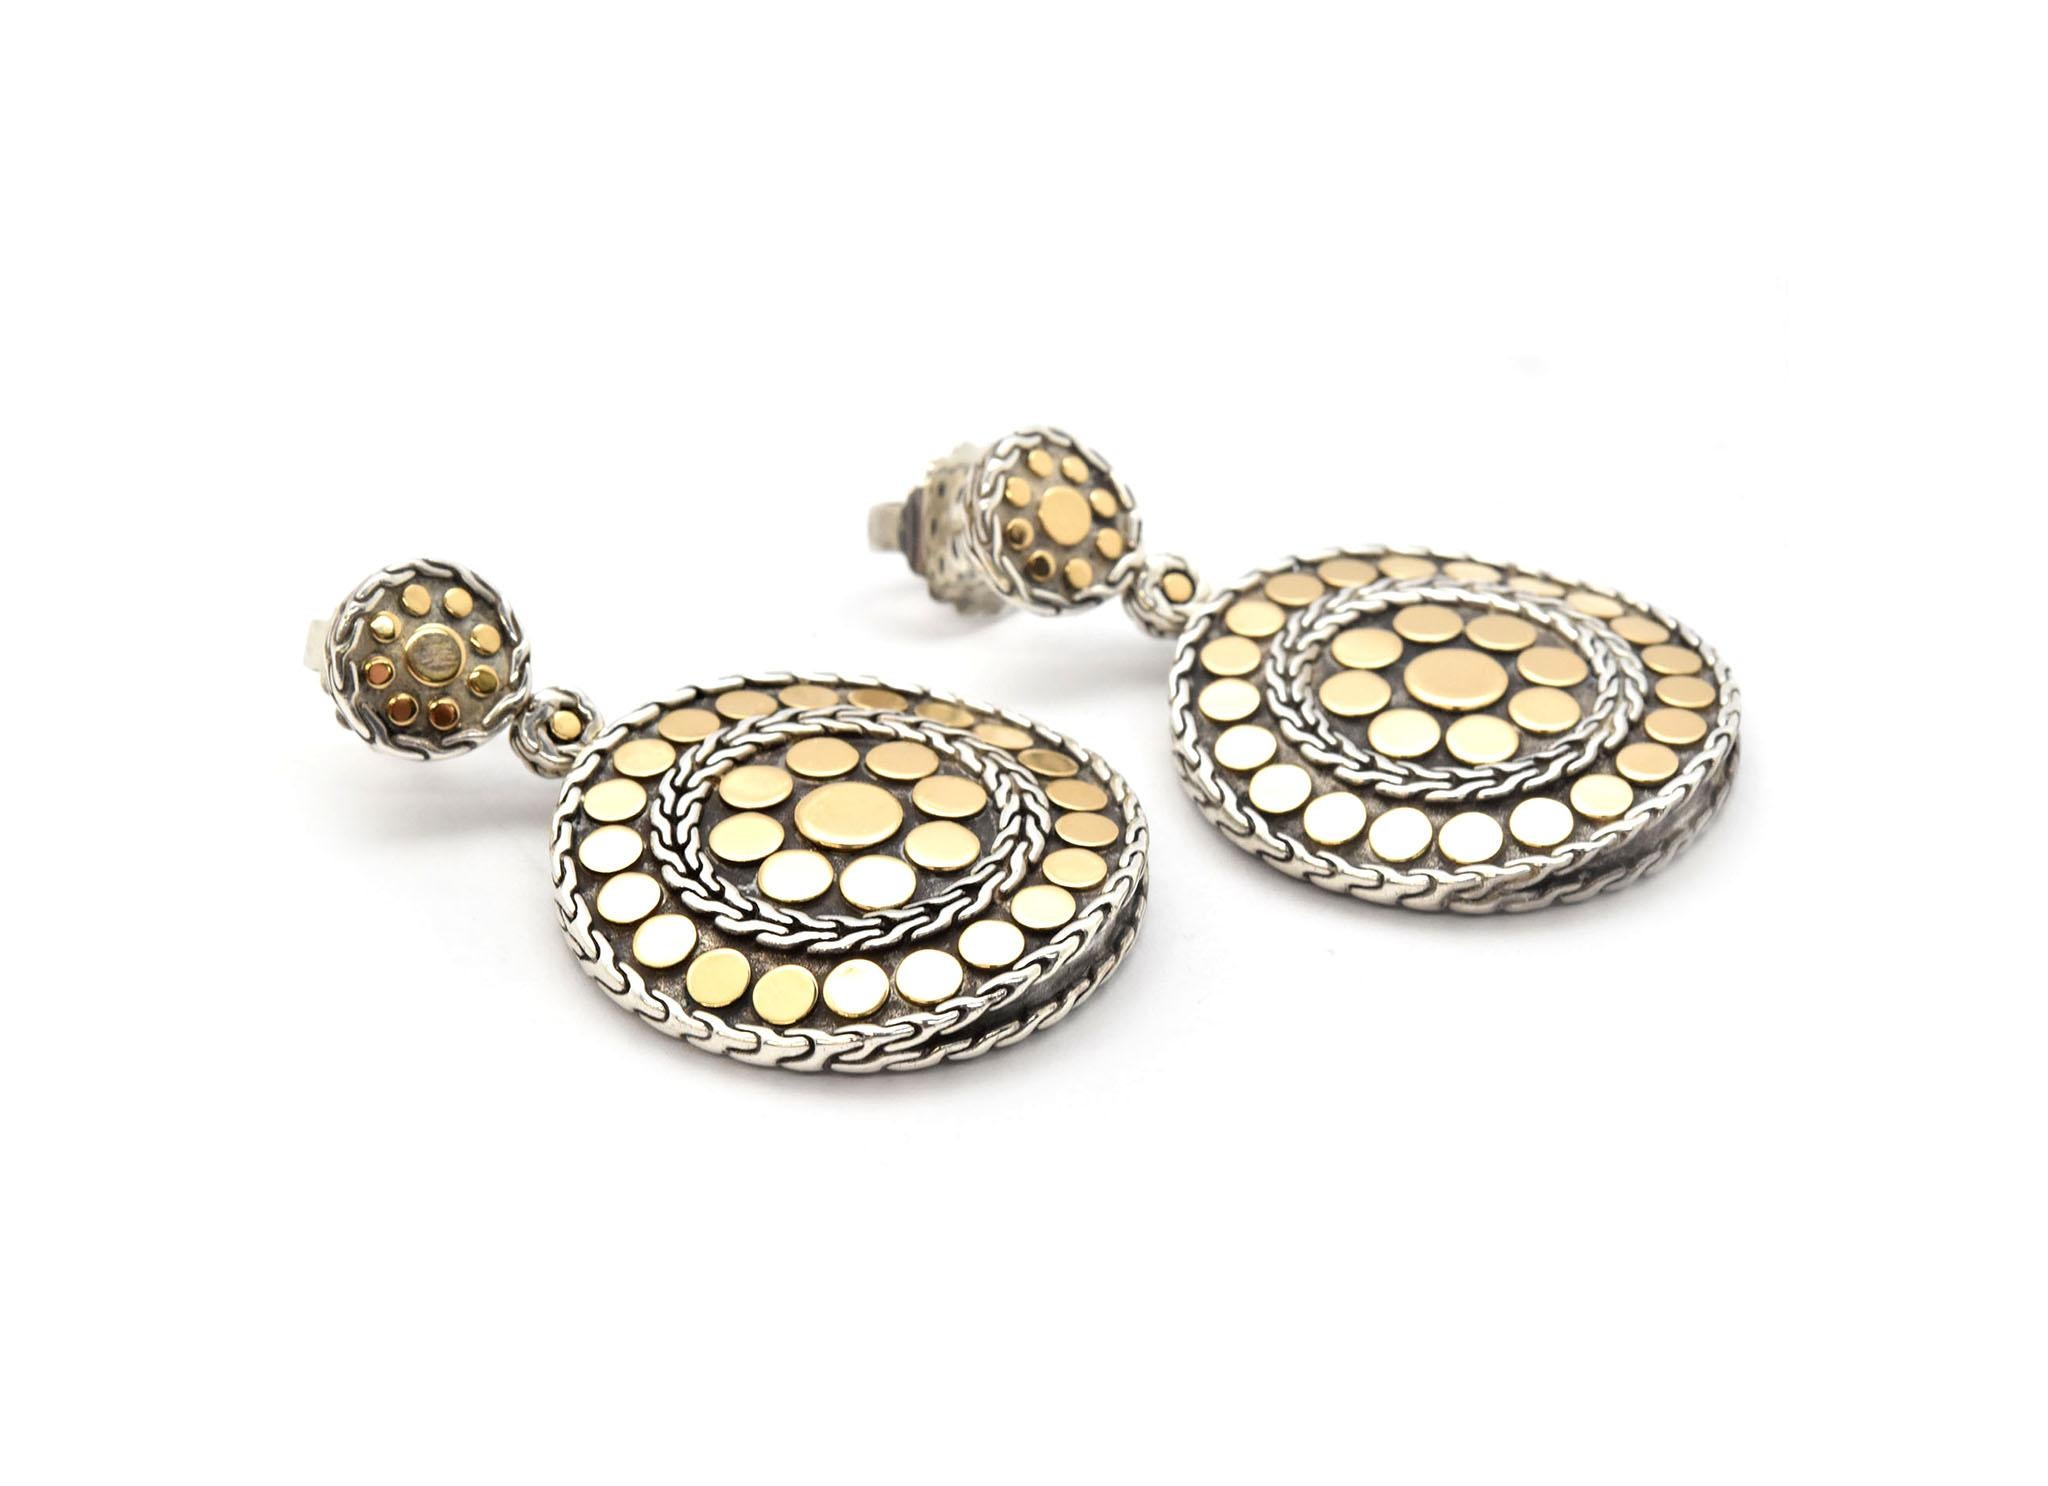 This pair of earrings is made in 18k yellow gold and stainless steel by designer John Hardy in the dot collection. These earrings feature a unique arrangement of gold dot accents and sterling silver designs. The post of the earring sticks into a